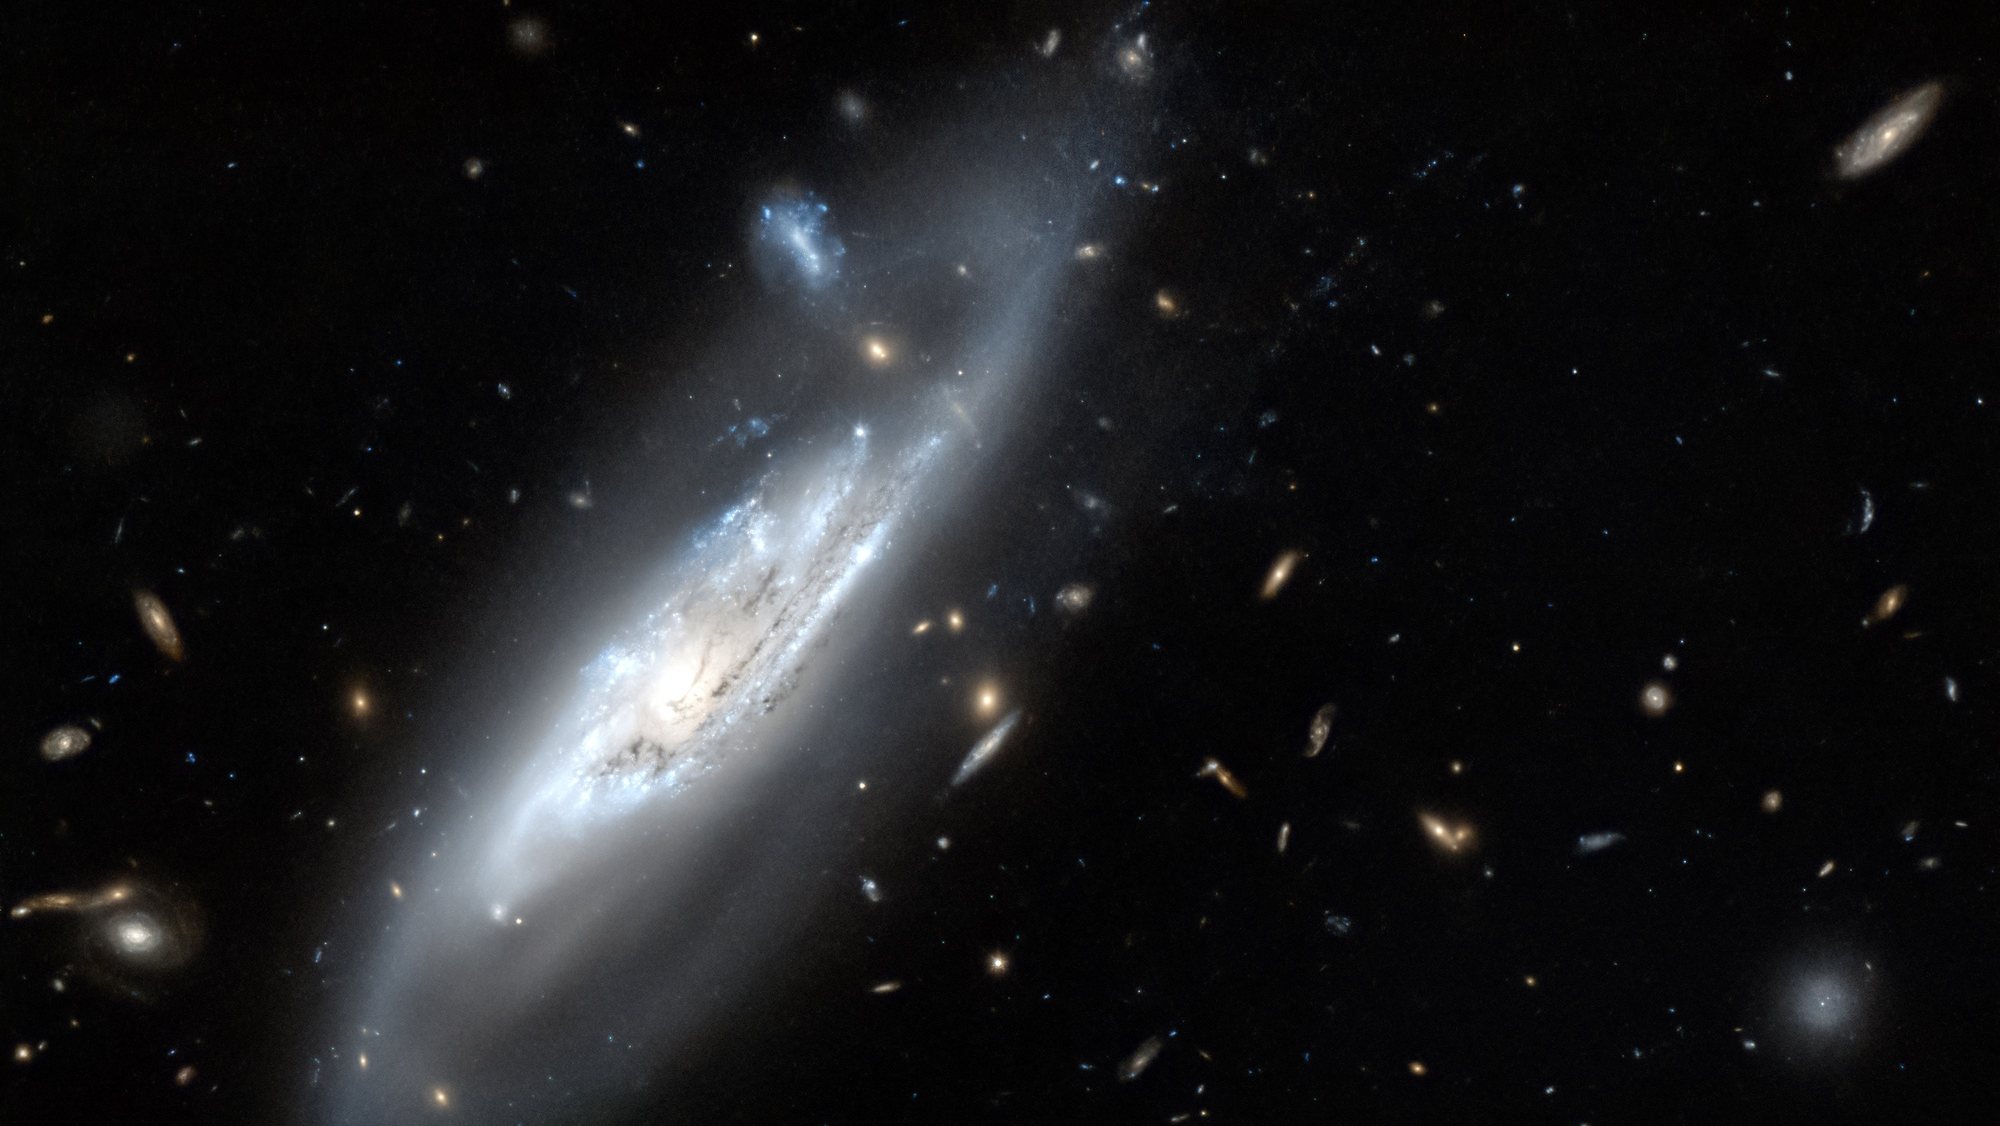 epa08556324 A handout photo made available by the European Space Agency (ESA) on 20 July 2020 shows an image taken with the NASA/ESA Hubble Space Telescope of the silvery-blue spiral arms of the galaxy NGC 4848 (issued 20 July 2020). A notable feature of most spiral galaxies is the multitude of arching spiral arms that seemingly spin out from the galaxy’s centre. Not only do we see the inner section of the spiral arms containing hundreds of thousands of young, bright, blue stars, but Hubble has also captured the extremely faint wispy tails of the outer spiral arms. This wispy barred spiral galaxy was first discovered in 1865 by the German astronomer Heinrich Louis d’Arrest. In his career, Heinrich also notably discovered the asteroid 76 Freia and many other galaxies and he also contributed to the discovery of Neptune. If you are situated in the Northern Hemisphere with a large telescope, you might just be able to observe the ghost-like appearance of this faint galaxy  within faint constellation of Coma Berenices (Berenice’s Hair).  EPA/ESA/Hubble &amp; NASA, M. Gregg / HANDOUT  HANDOUT EDITORIAL USE ONLY/NO SALES